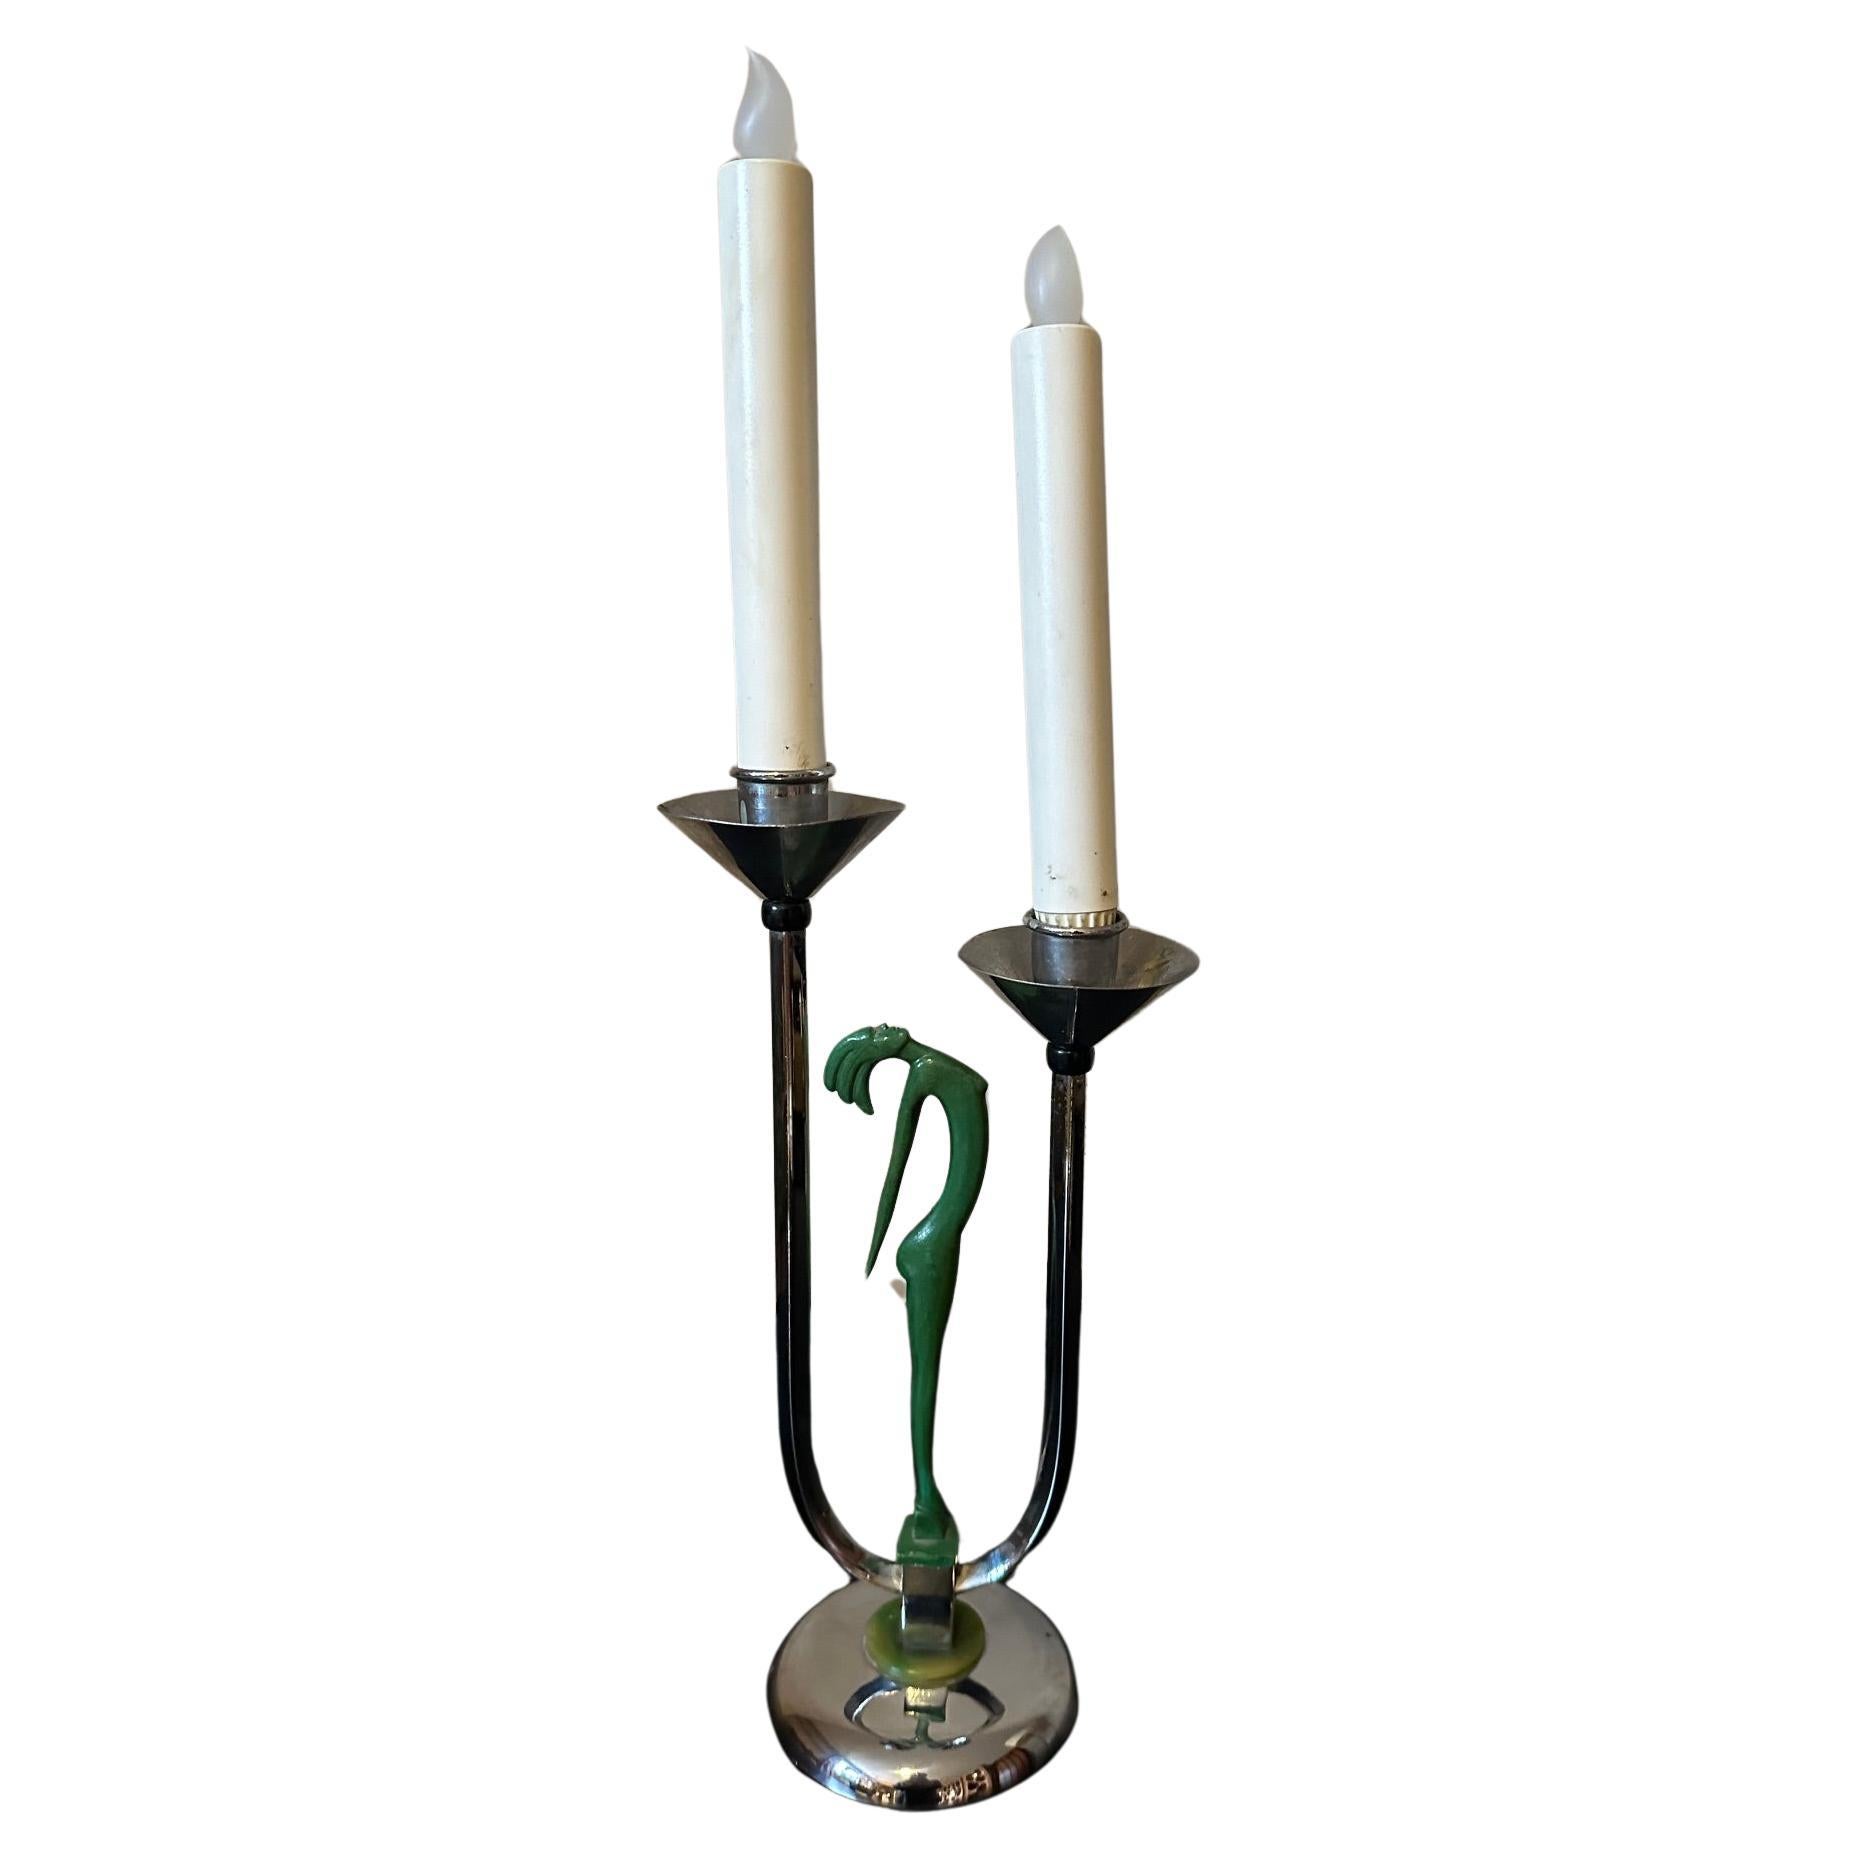 20th century English Bronze and Chromed Metal Candleholder, 1930s